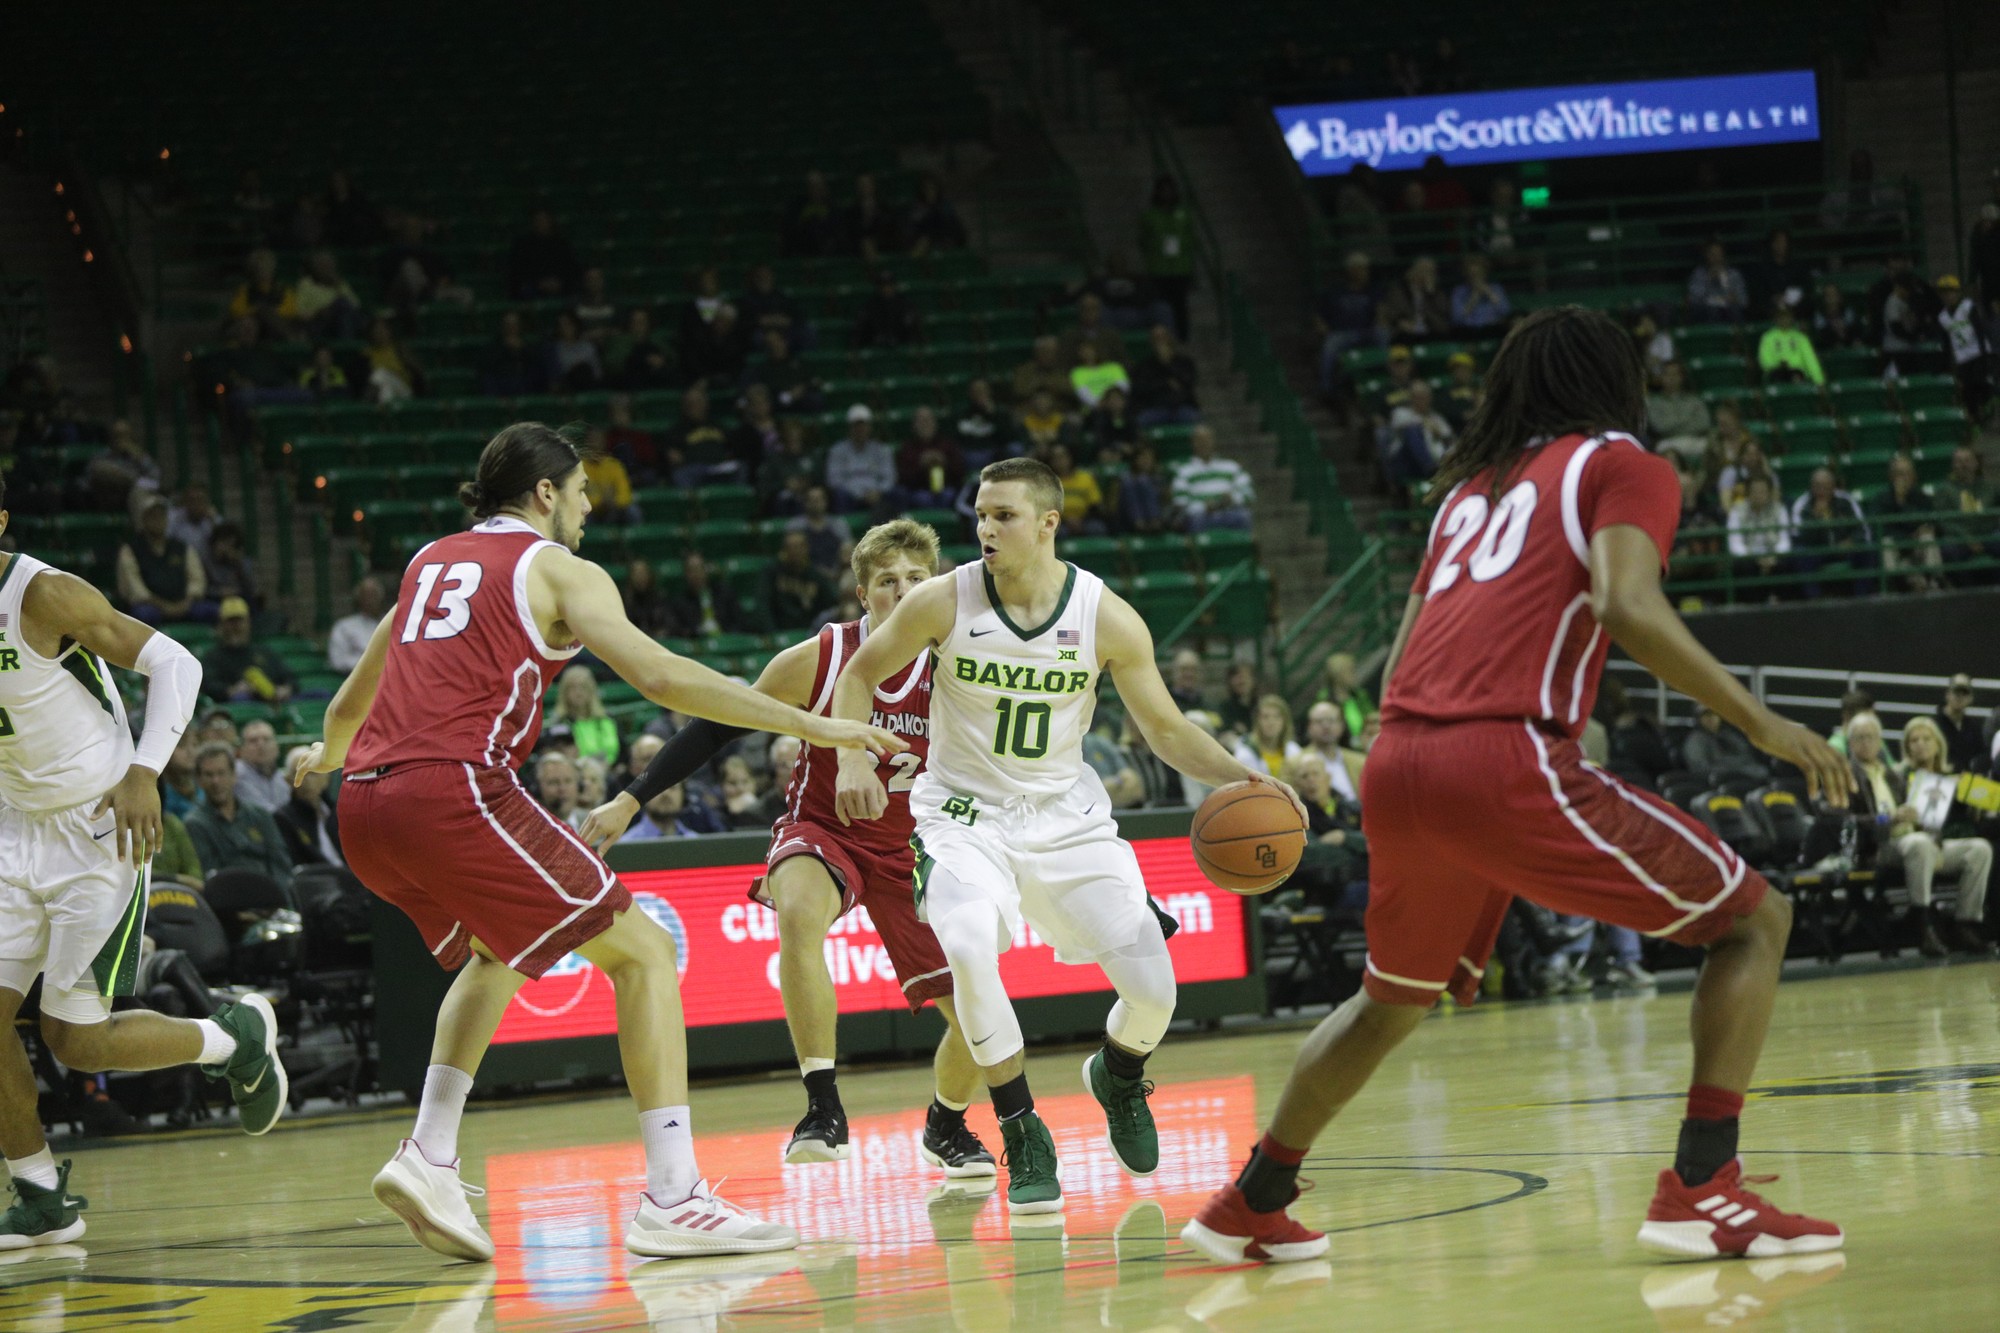 Men’s basketball faces Wichita State in weekend road test | The Baylor Lariat